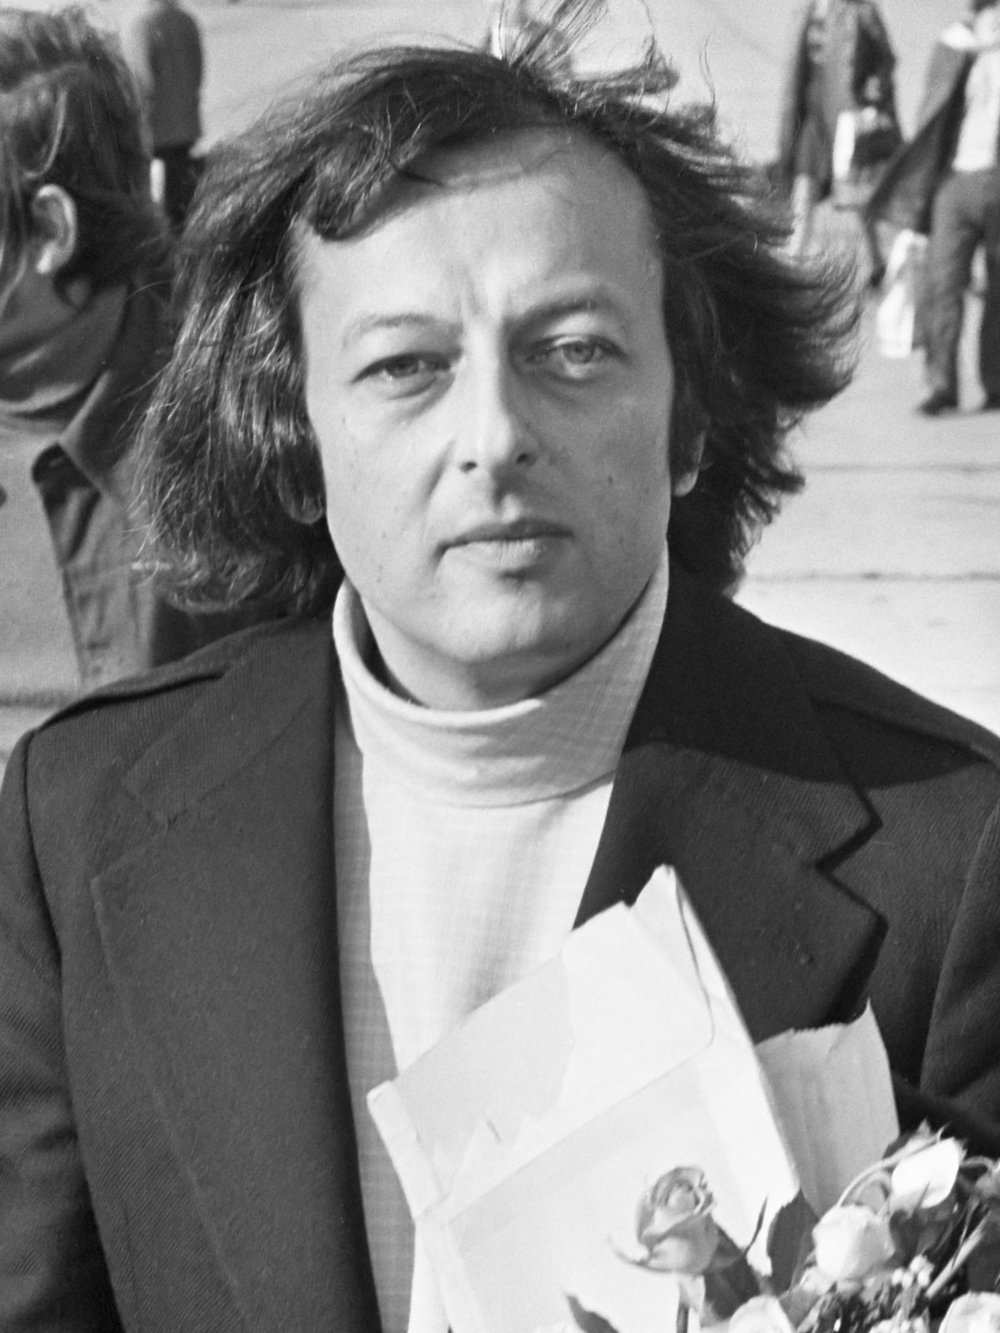 André Previn: Notes in the right order. Always